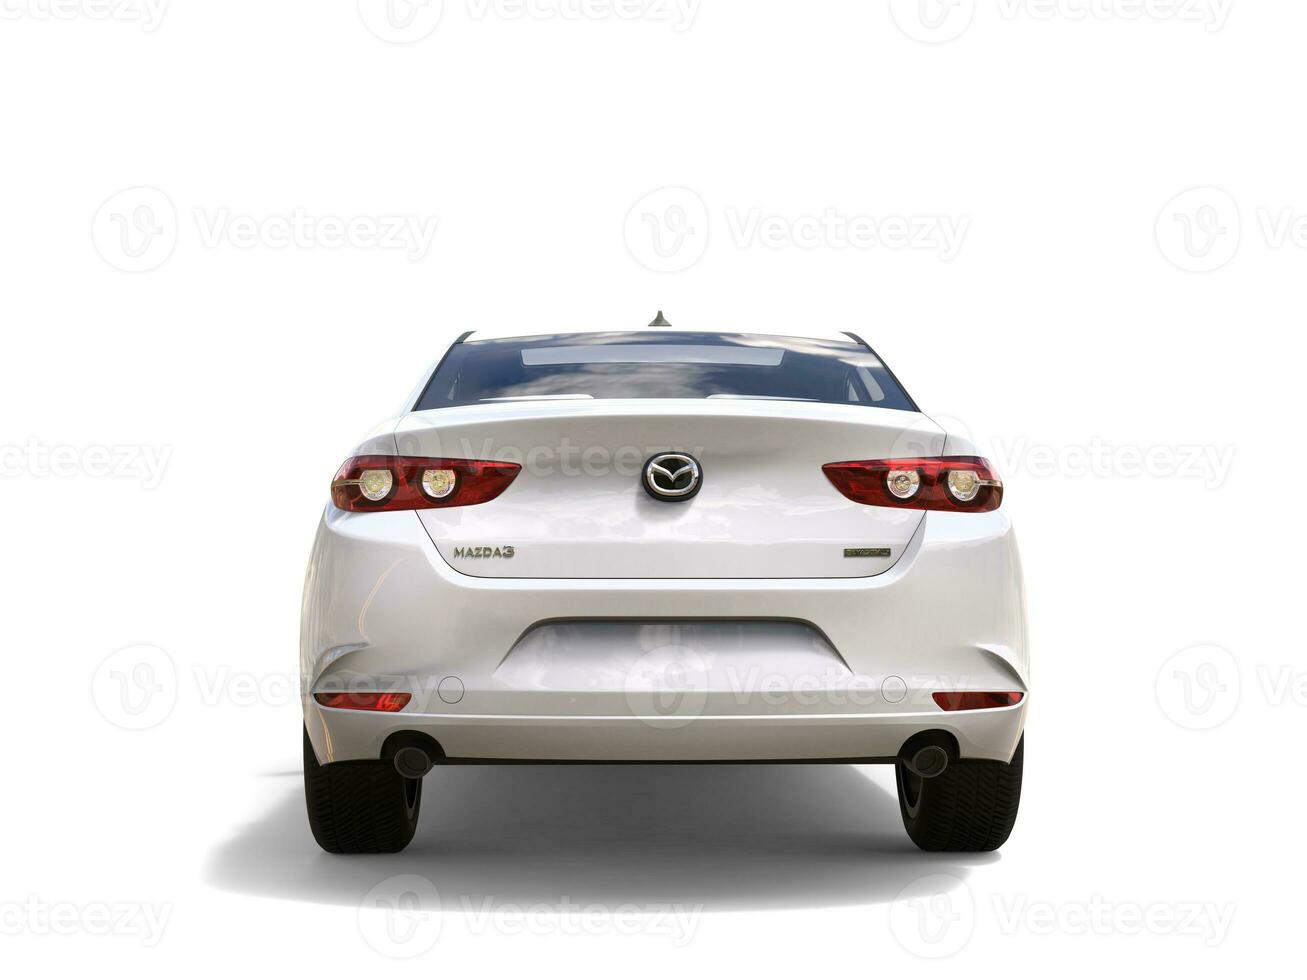 Clear white Mazda 3 2019 - 2022 model - back view - 3D Illustration - isolated on white background photo